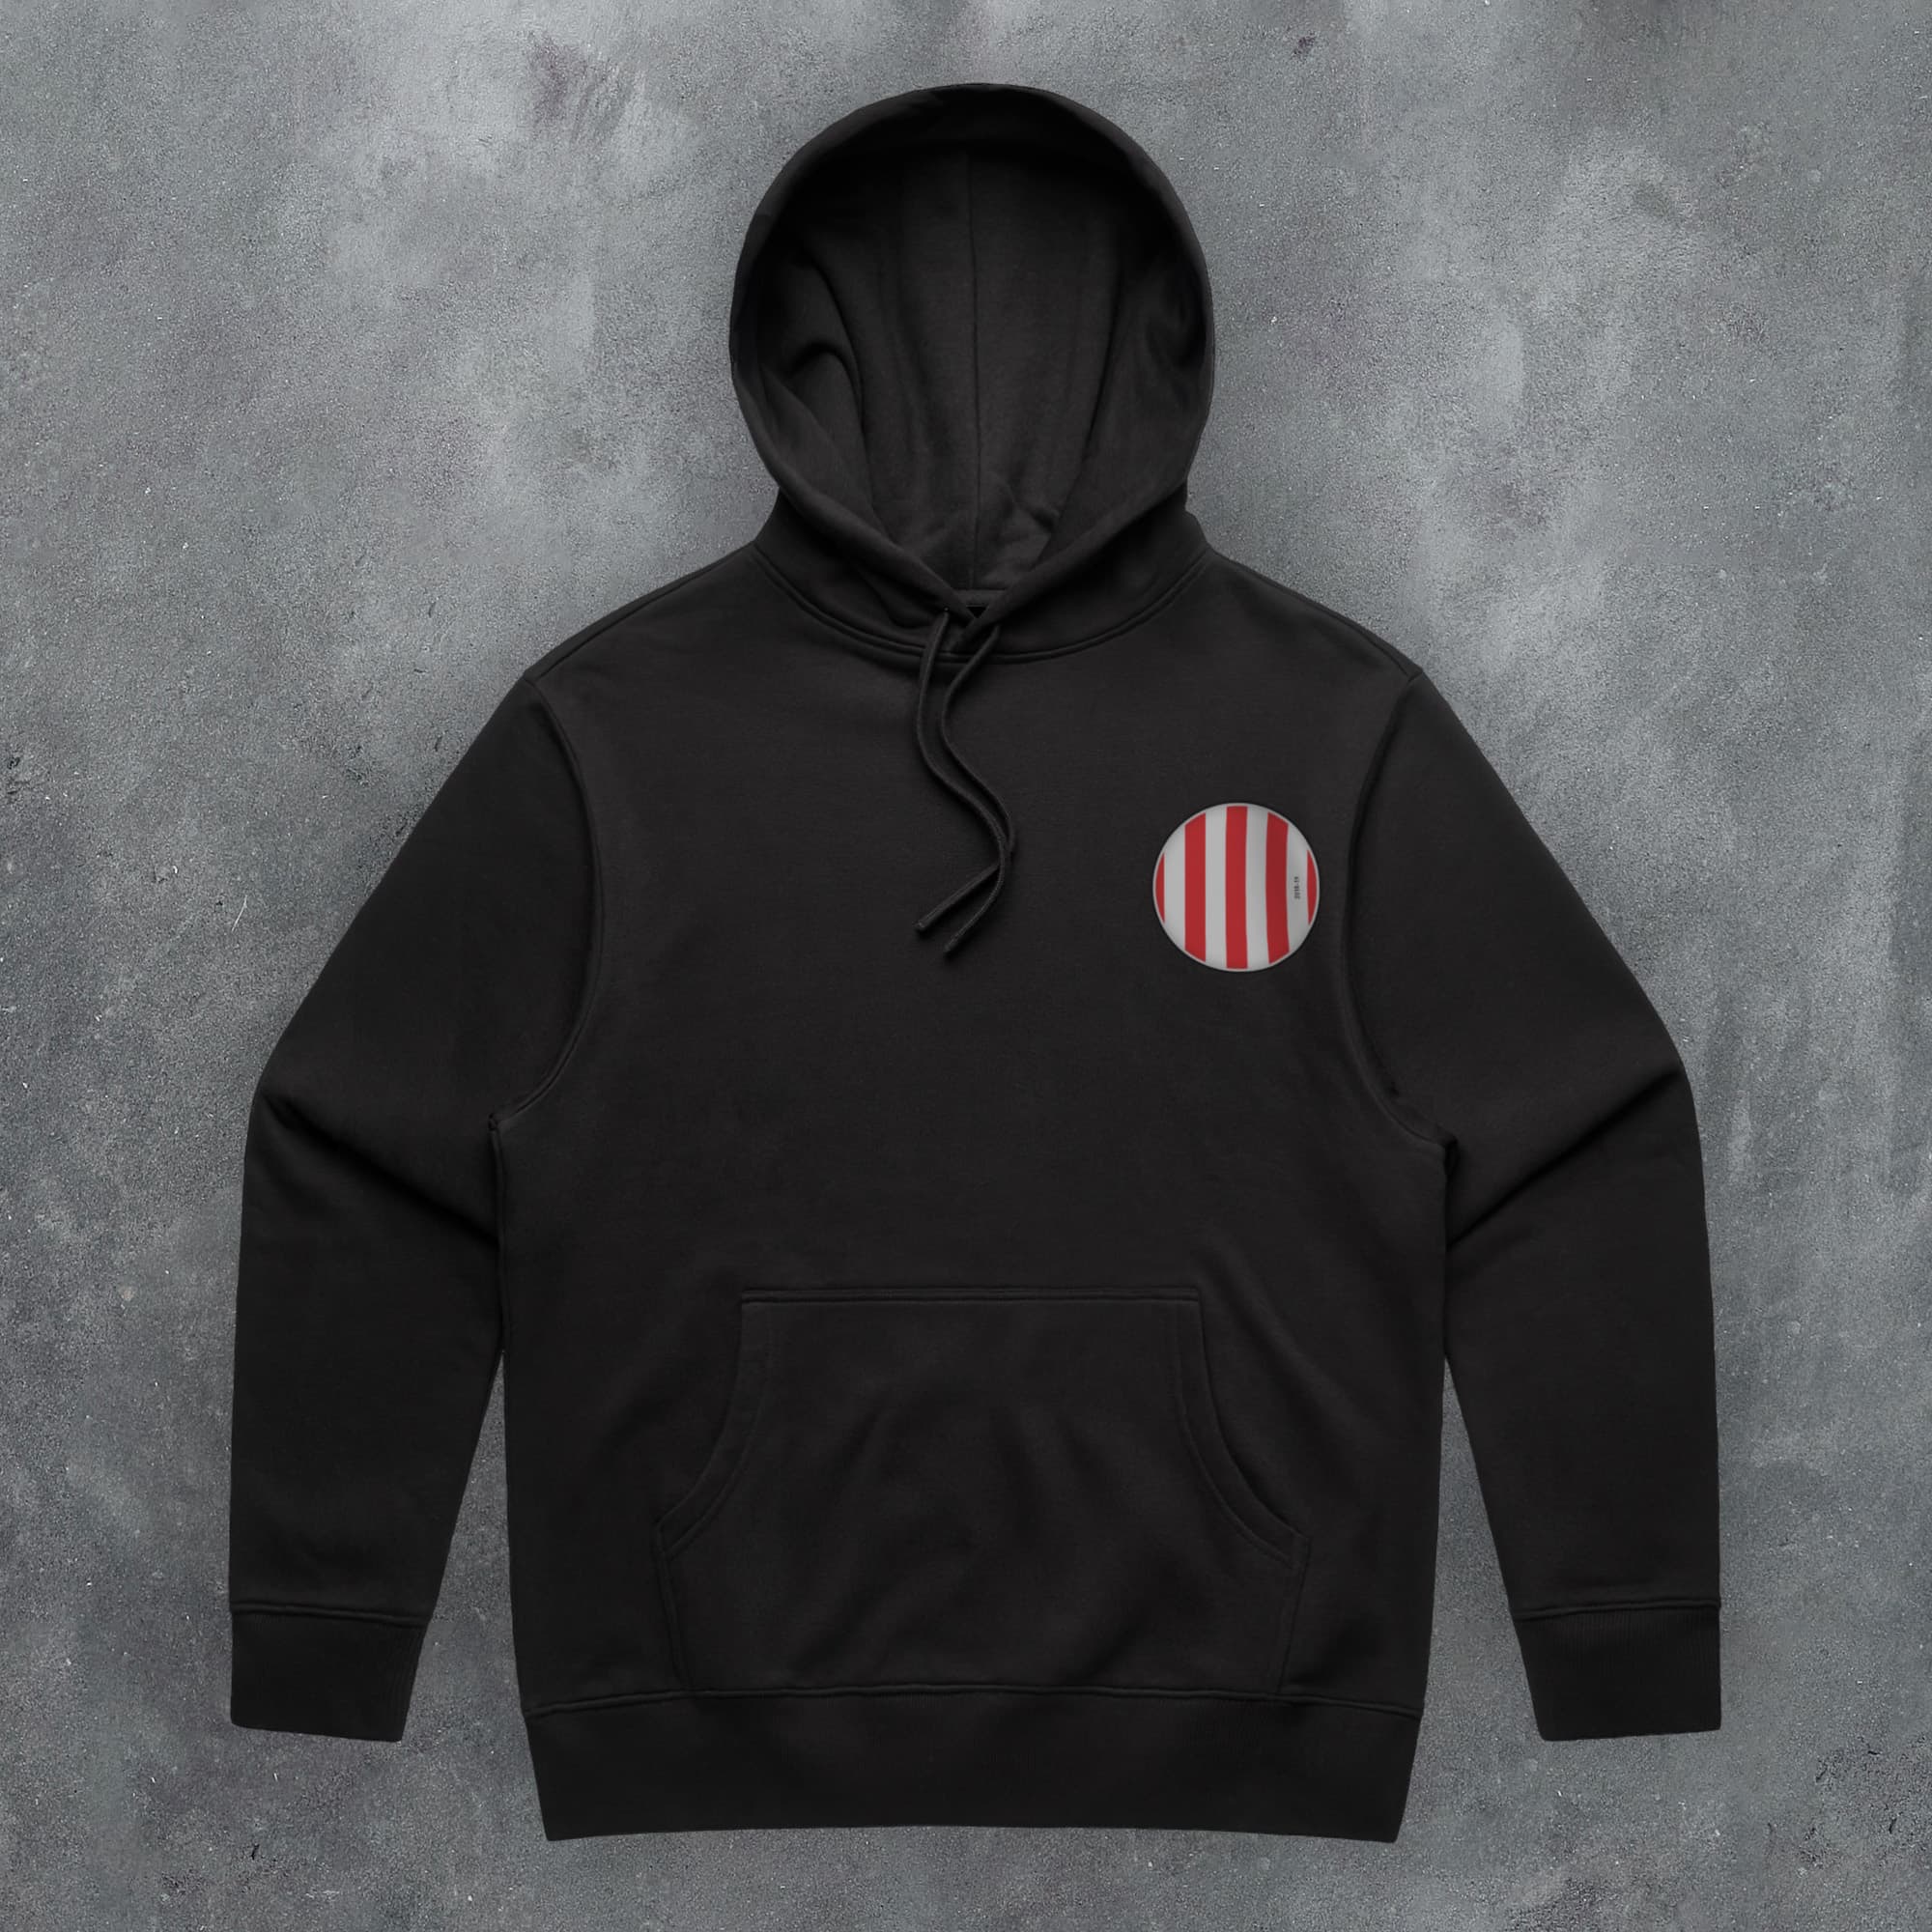 a black hoodie with an american flag patch on it